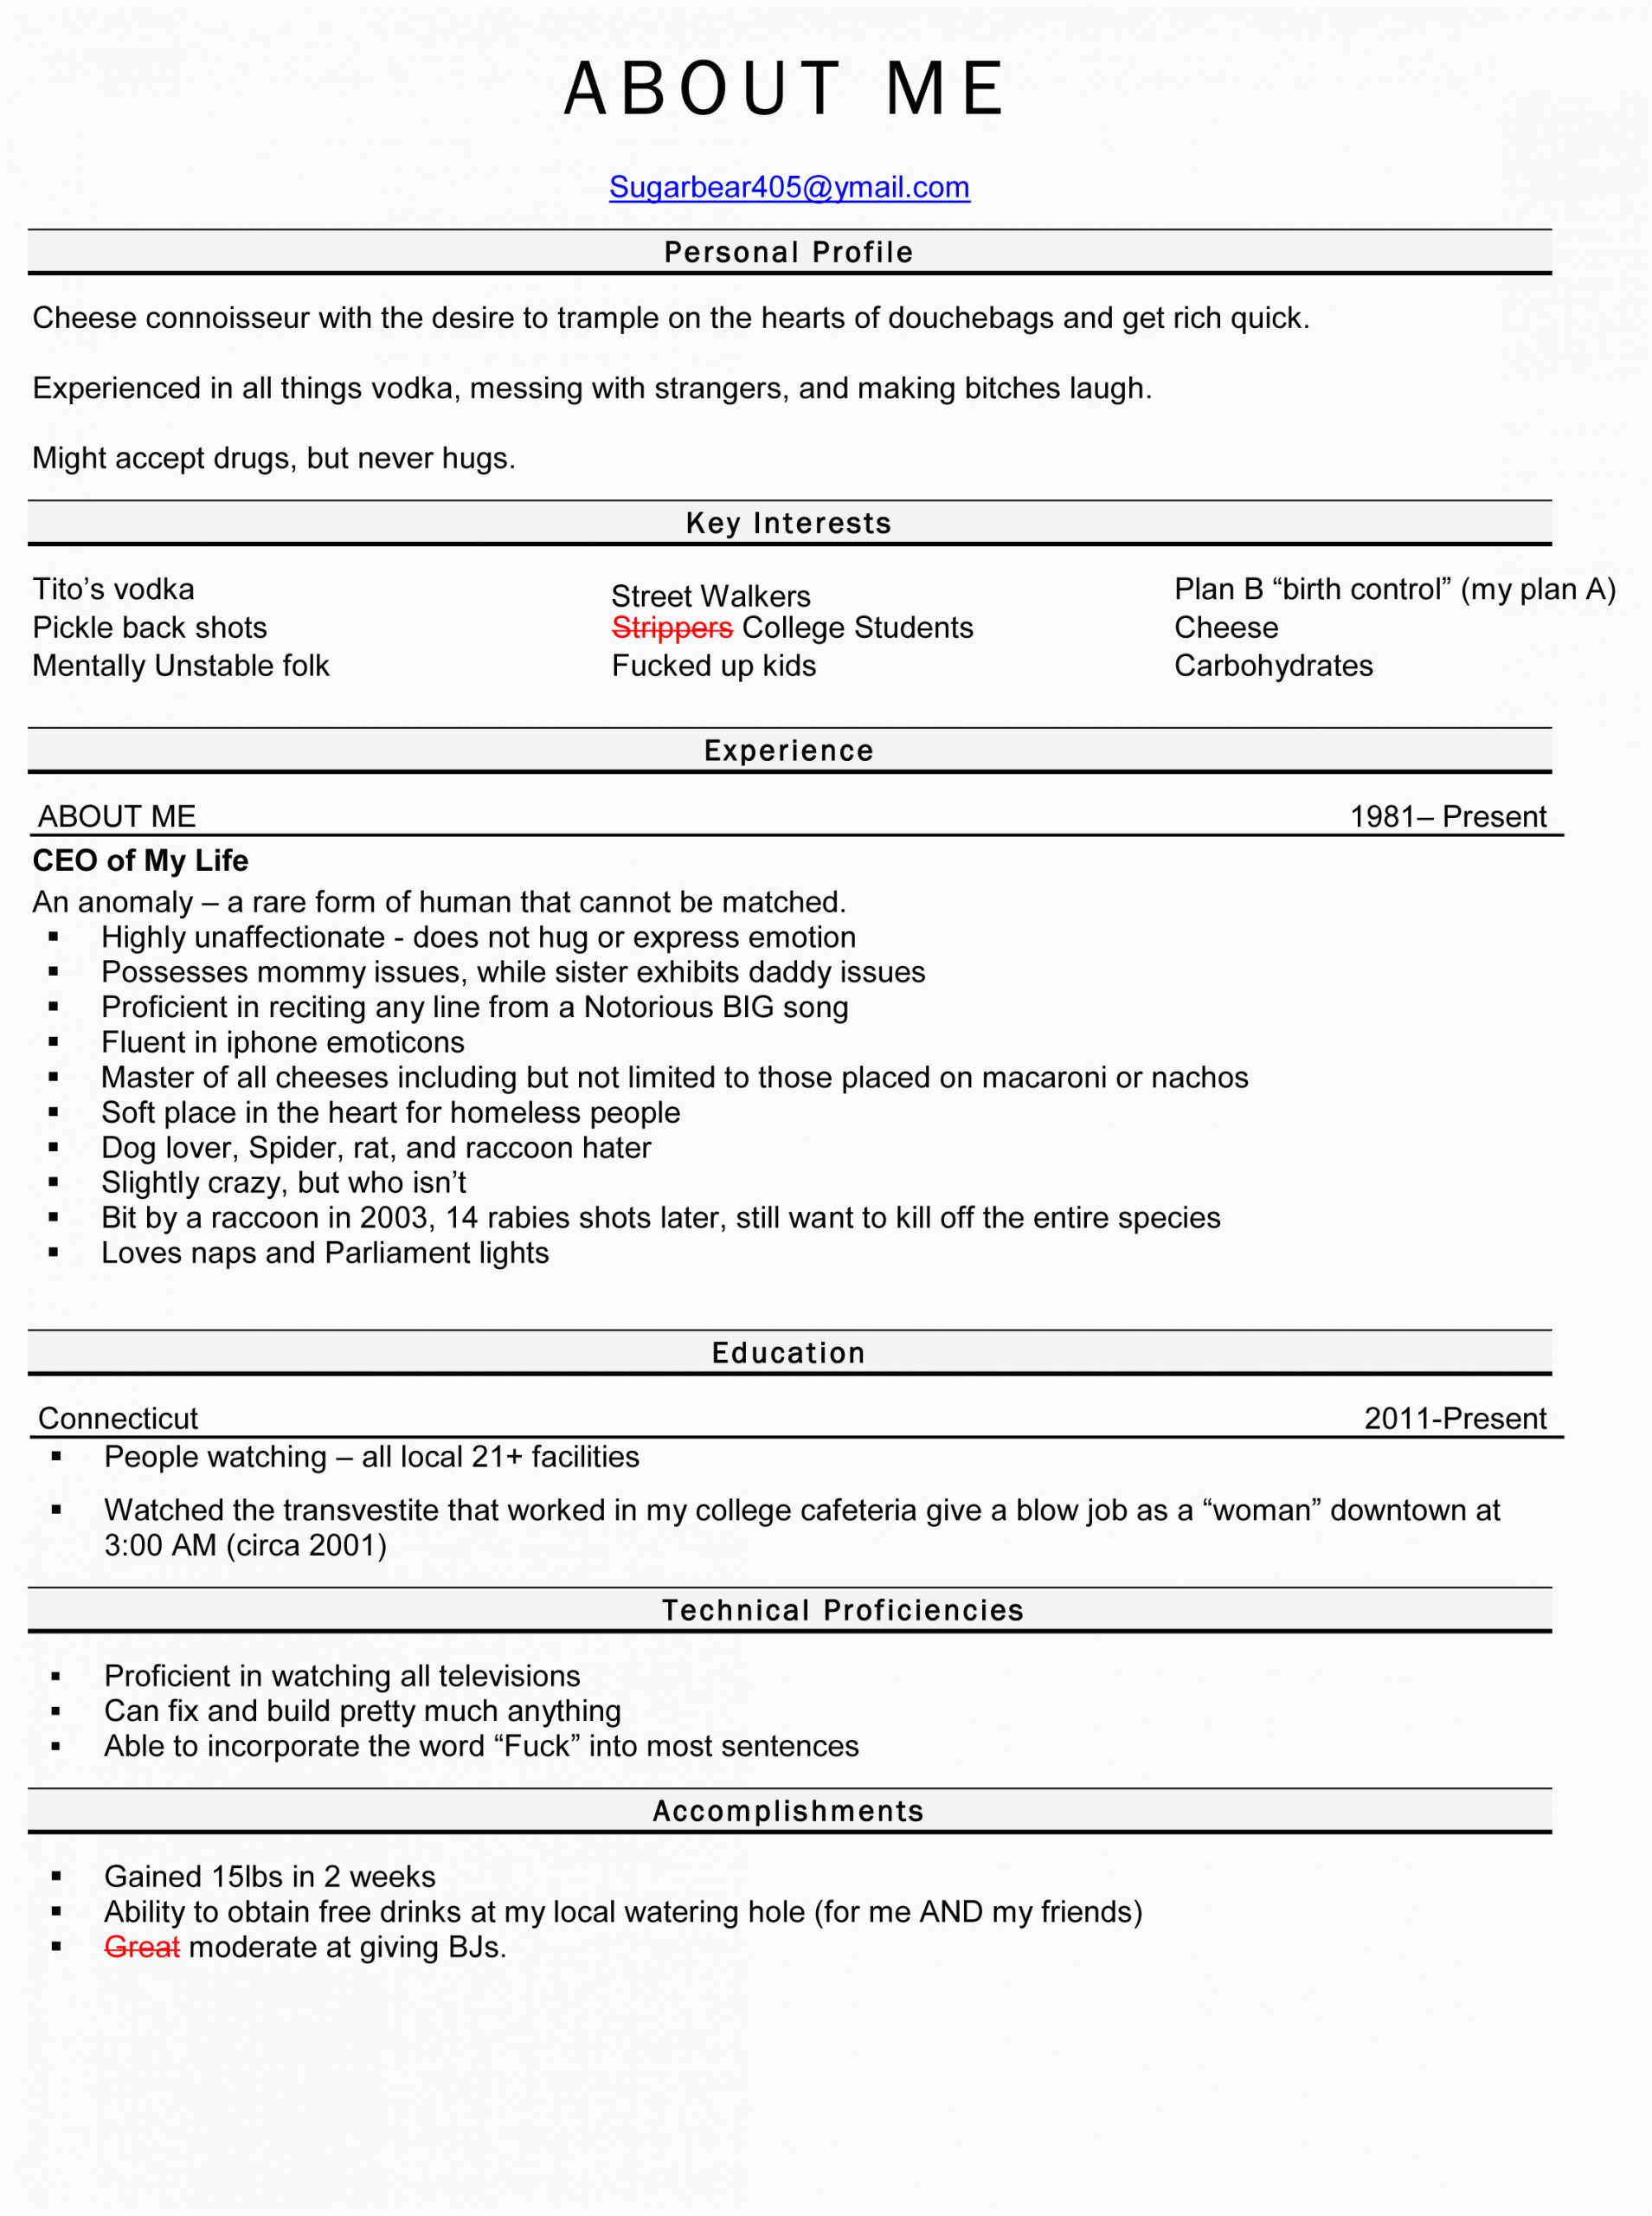 Sample Of About Me In Resume 10 About Me Section In Resume Proposal Resume